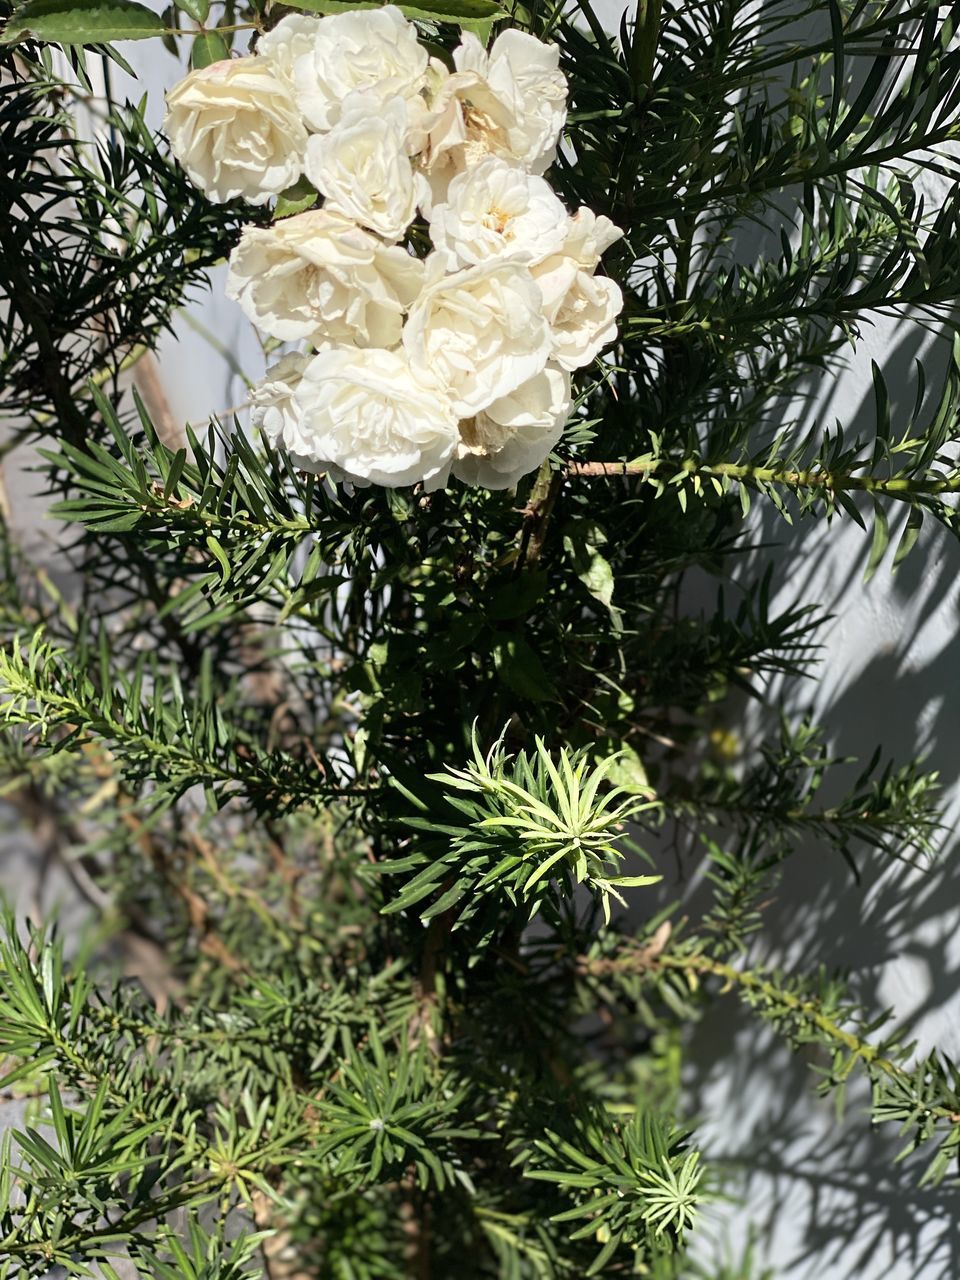 CLOSE-UP OF FRESH WHITE FLOWER PLANT WITH TREE